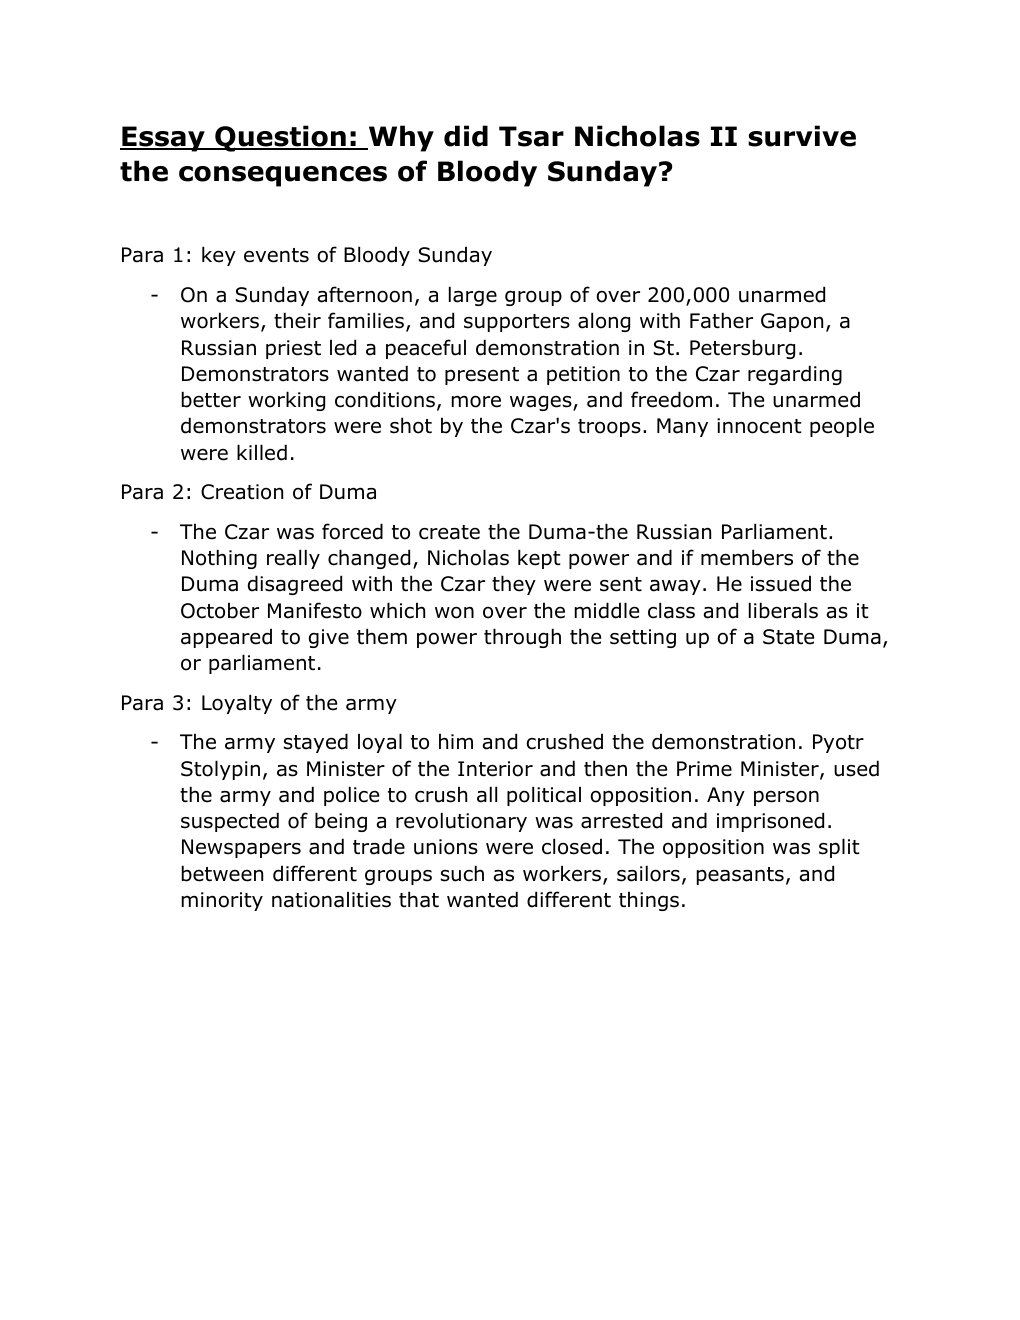 Prévisualisation du document Essay Question: Why did Tsar Nicholas II survive the consequences of Bloody Sunday?